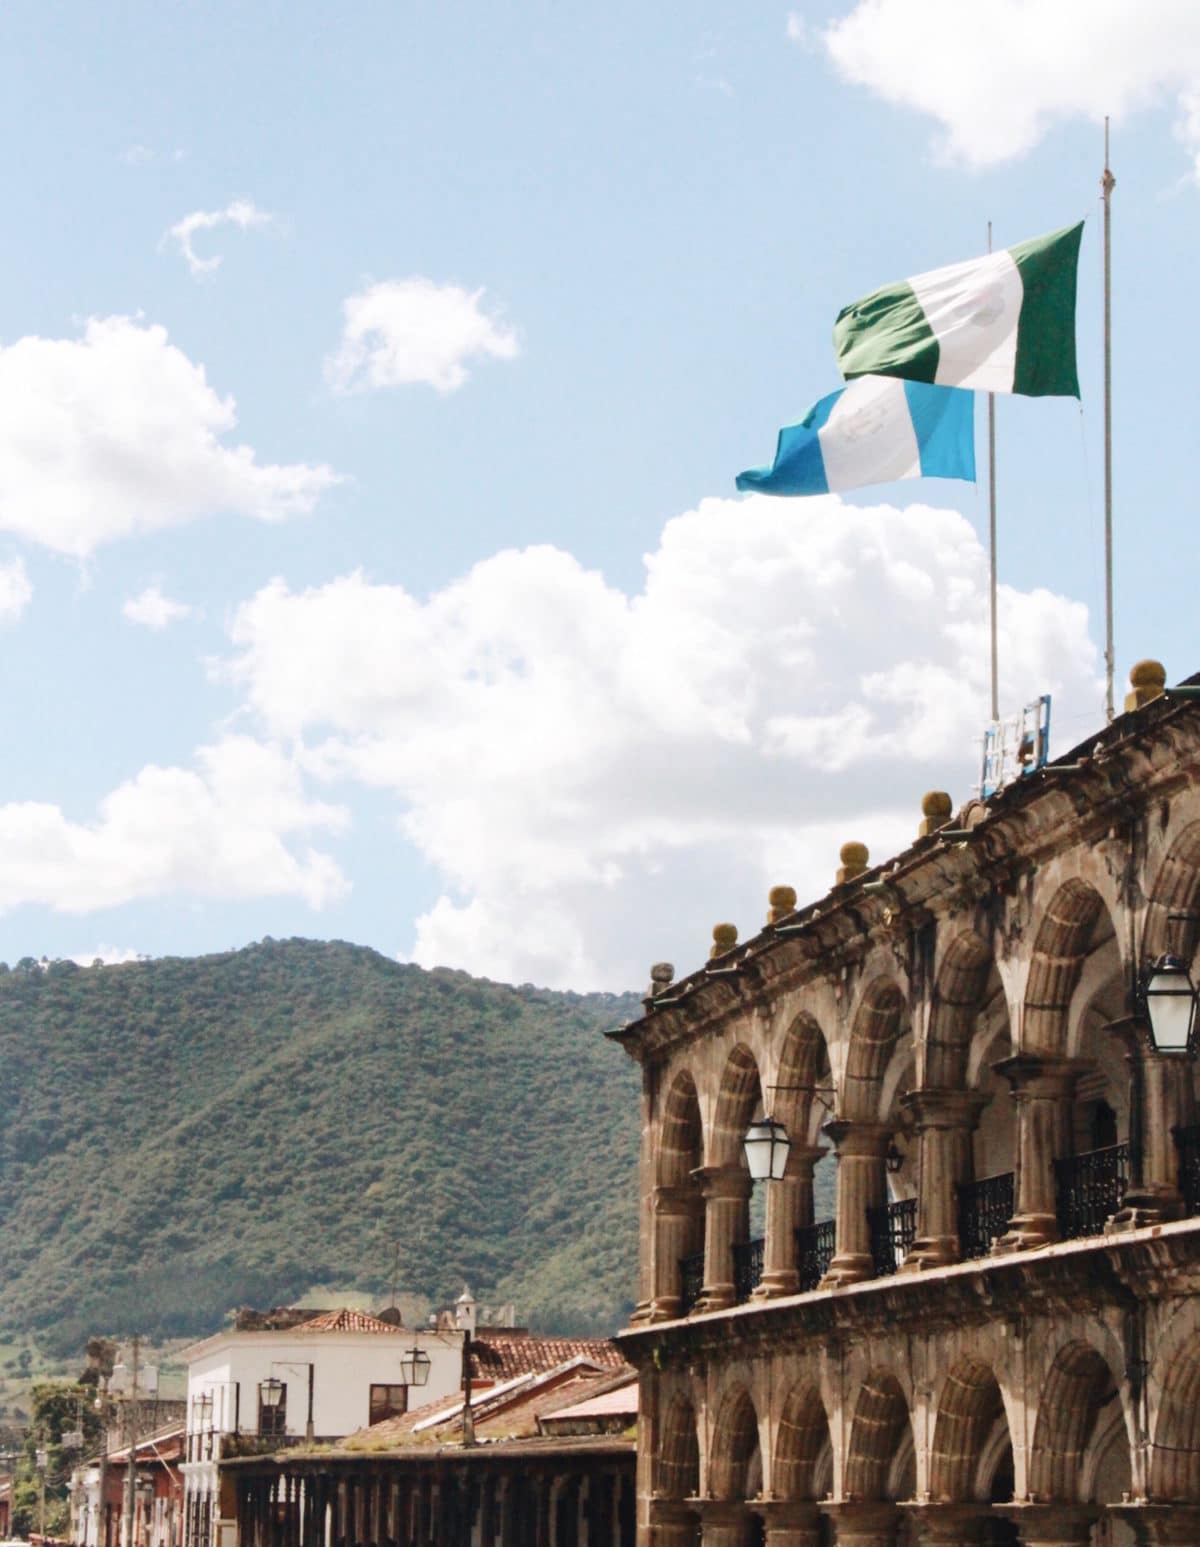 Photo diary of the charming town of Antigua in Guatemala, via www.livelikeitstheweekend.com